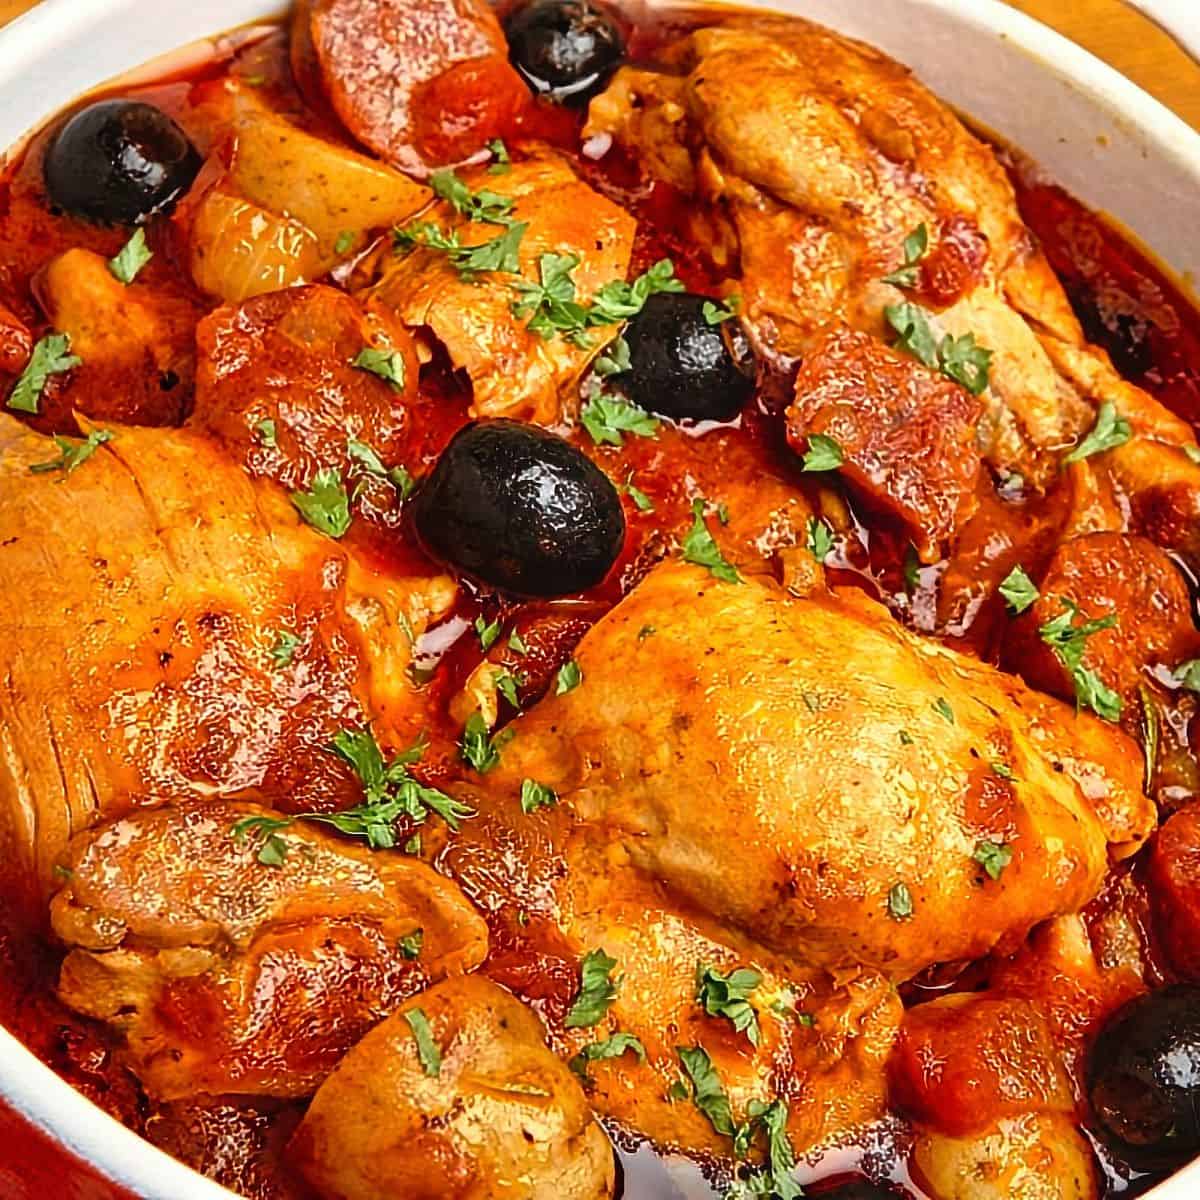 14. Baked Chicken with Spanish Olives - Spanish dish with chicken